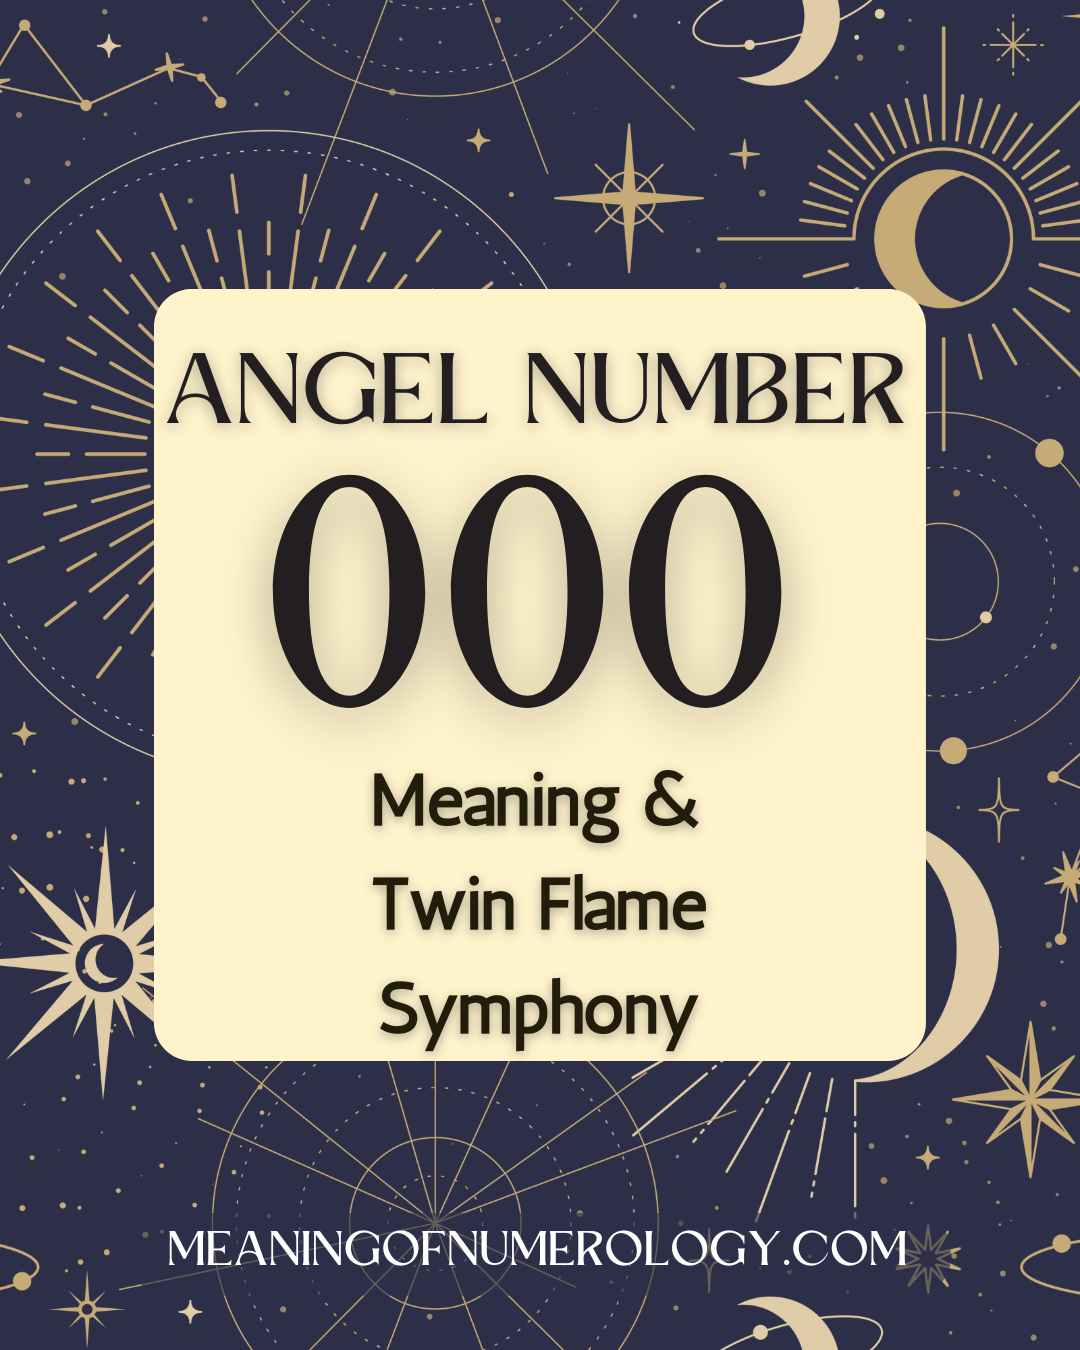 Purple Mystic Astrology Moon Angel Number 000 Meaning & Twin Flame Symphony